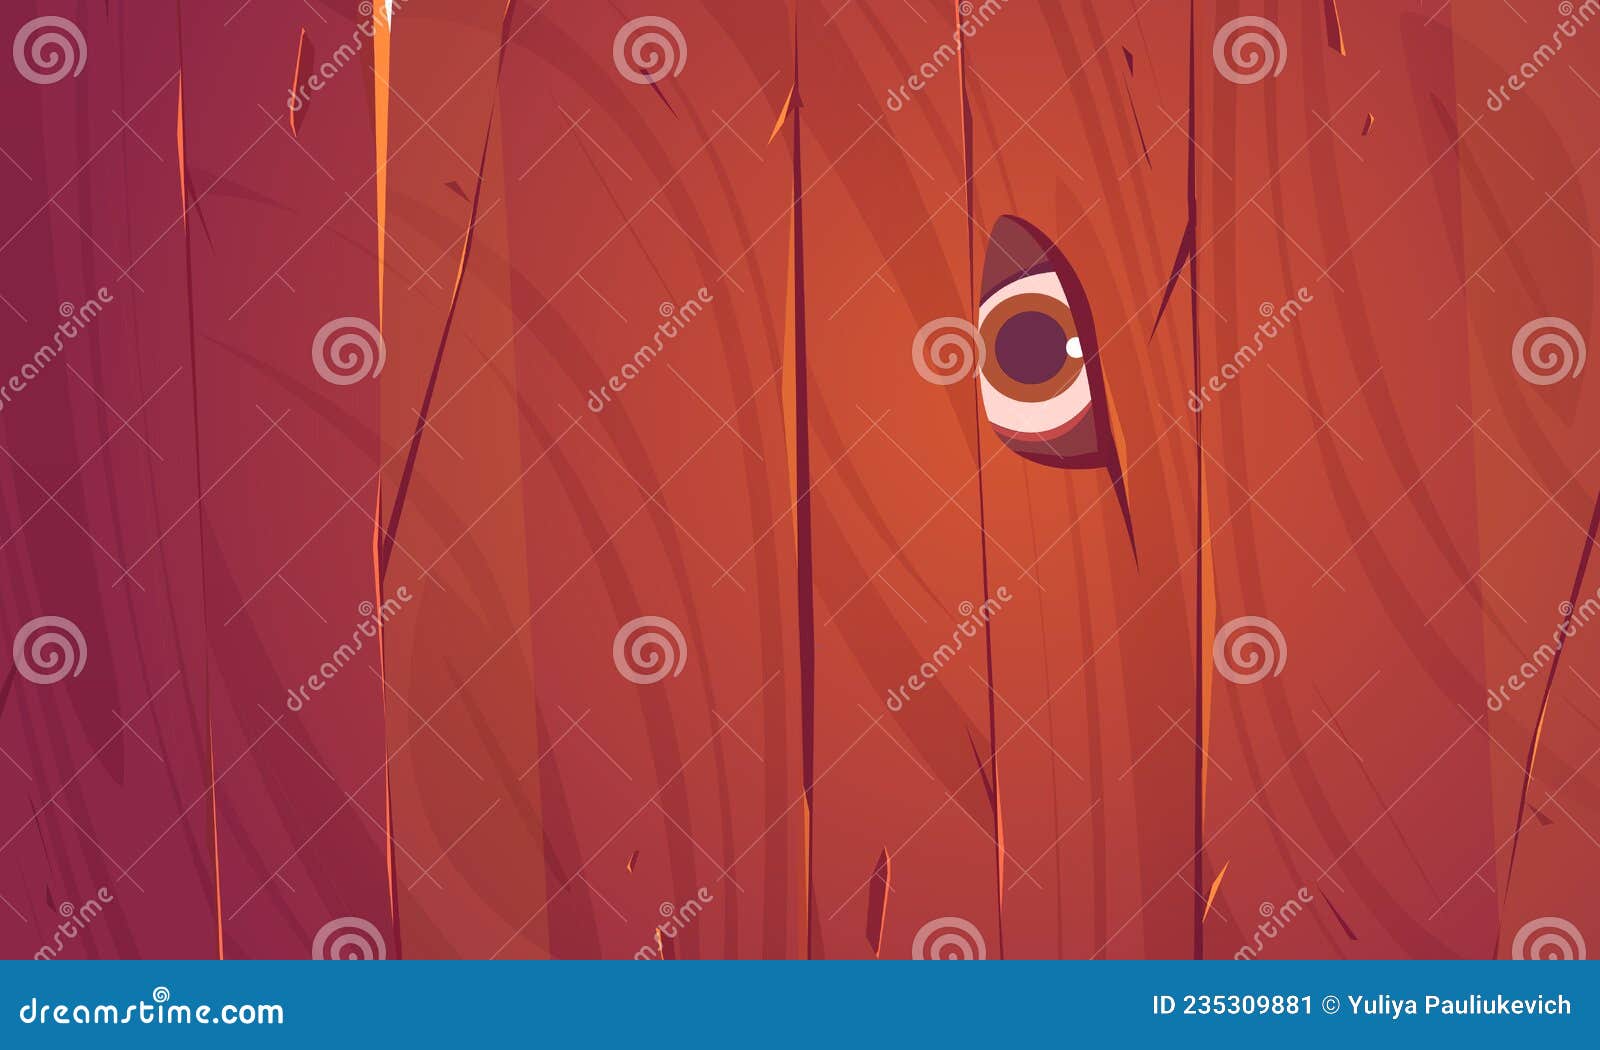 252 Voyeurism Stock Illustrations, Vectors and Clipart pic photo image